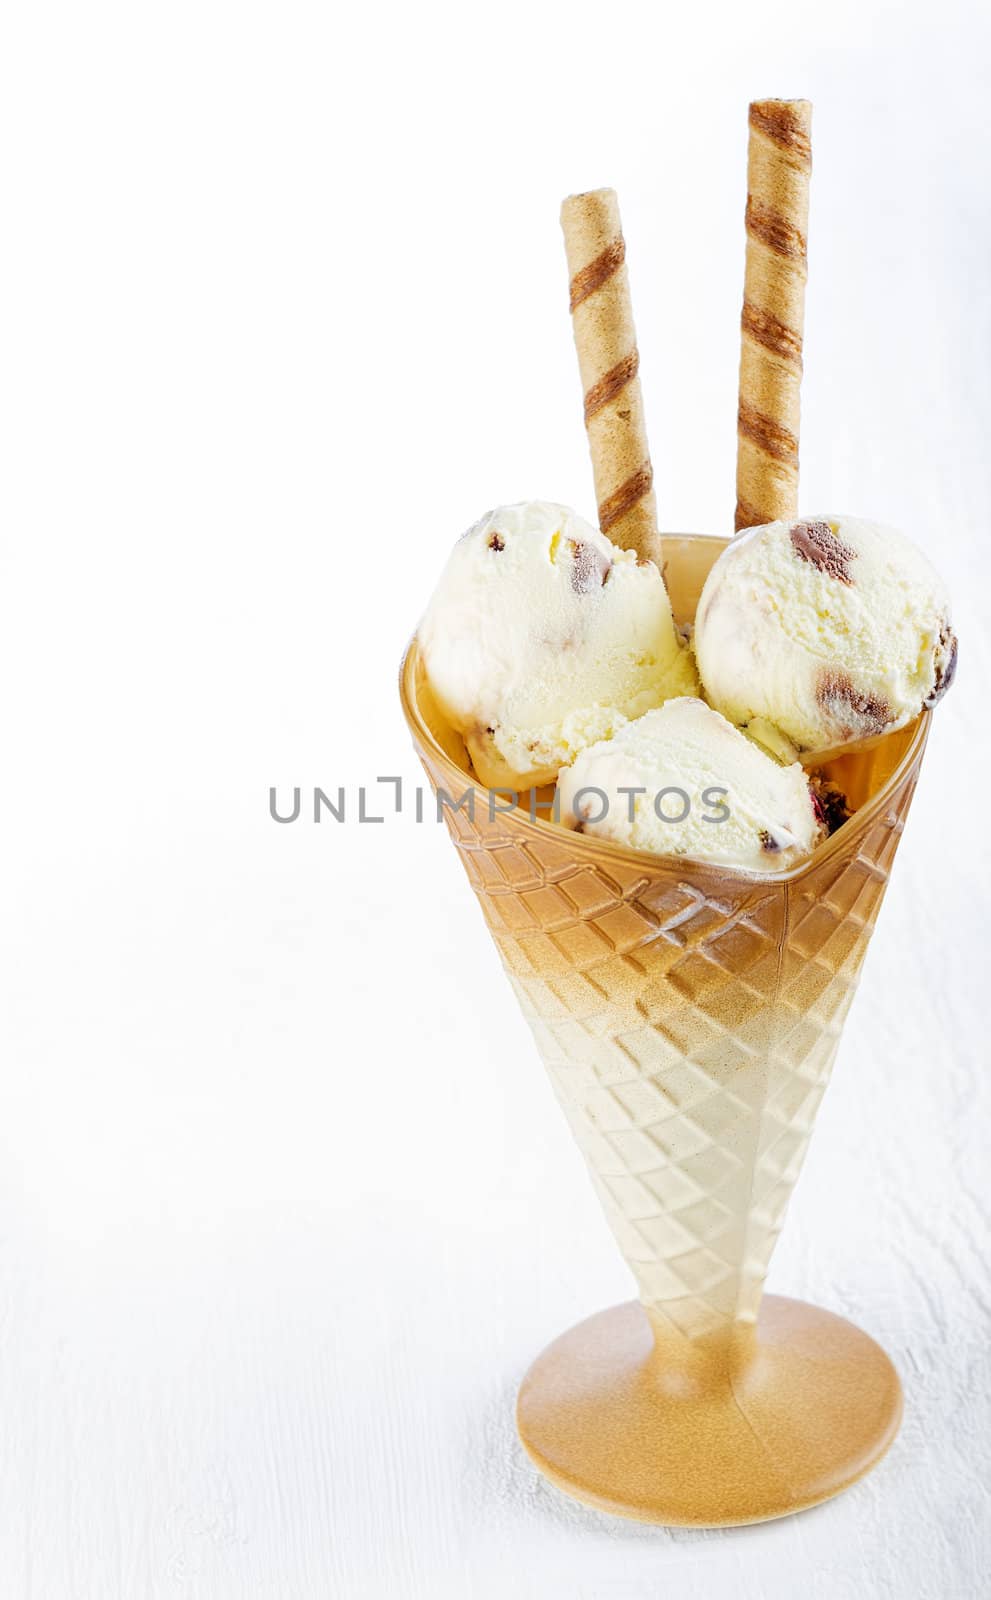 Vanilla ice cream  with wafer in cup on table by manaemedia